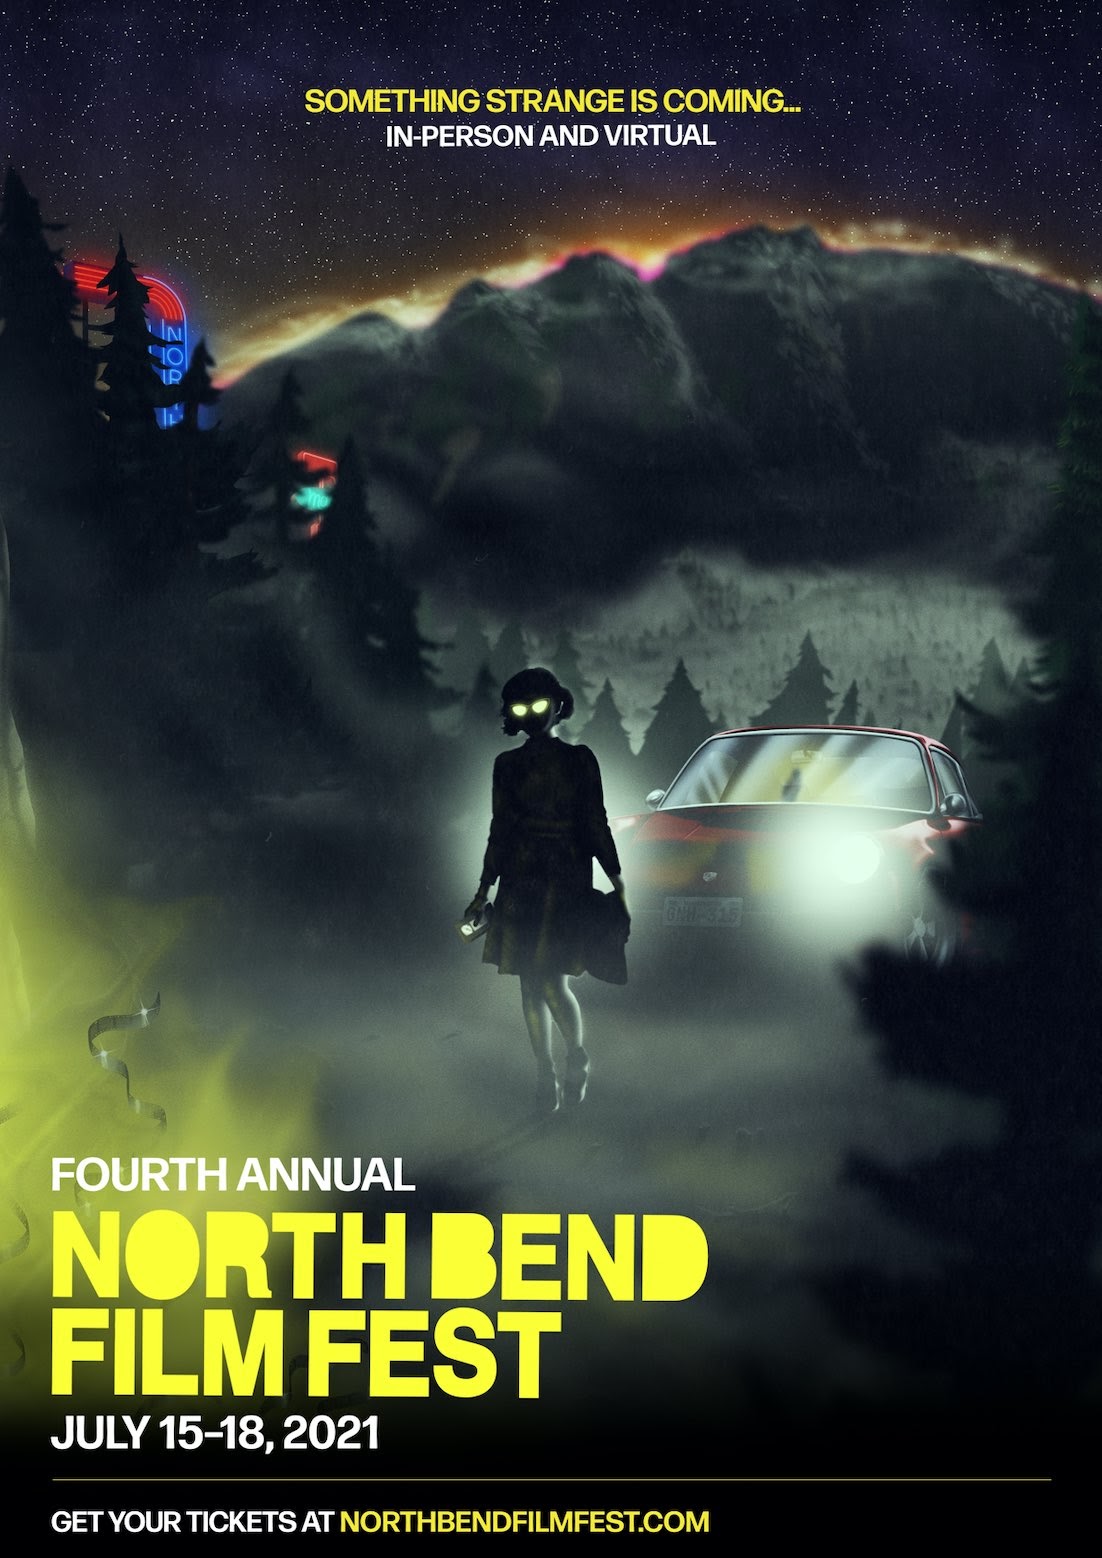 North Bend Film Festival Announces Upcoming Hybrid Edition for 2021